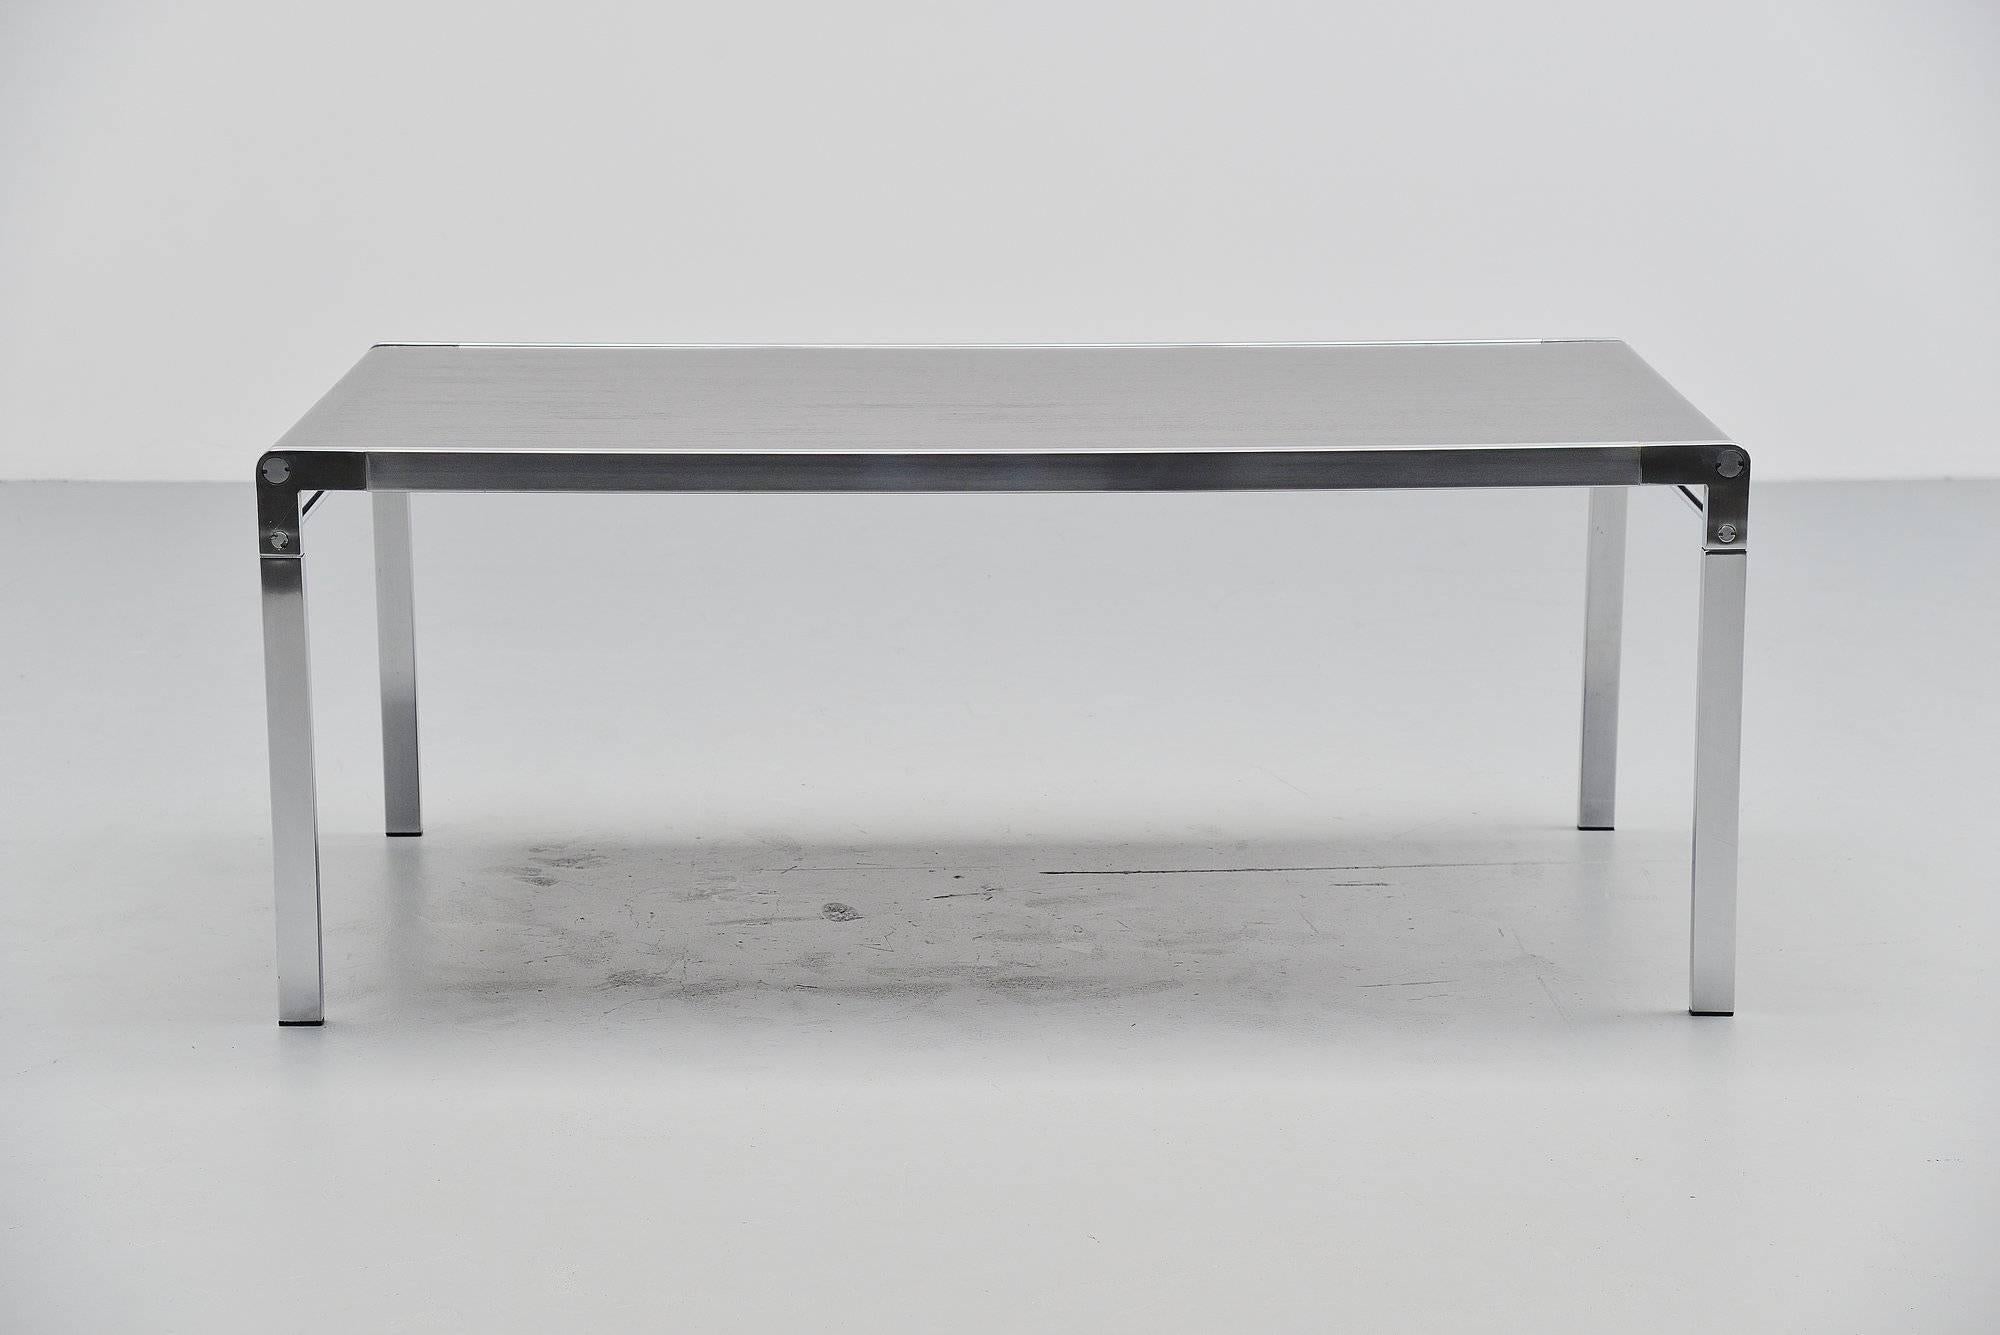 Plated Claire Bataille Paul Ibens Dining Table 'T Spectrum, 1971